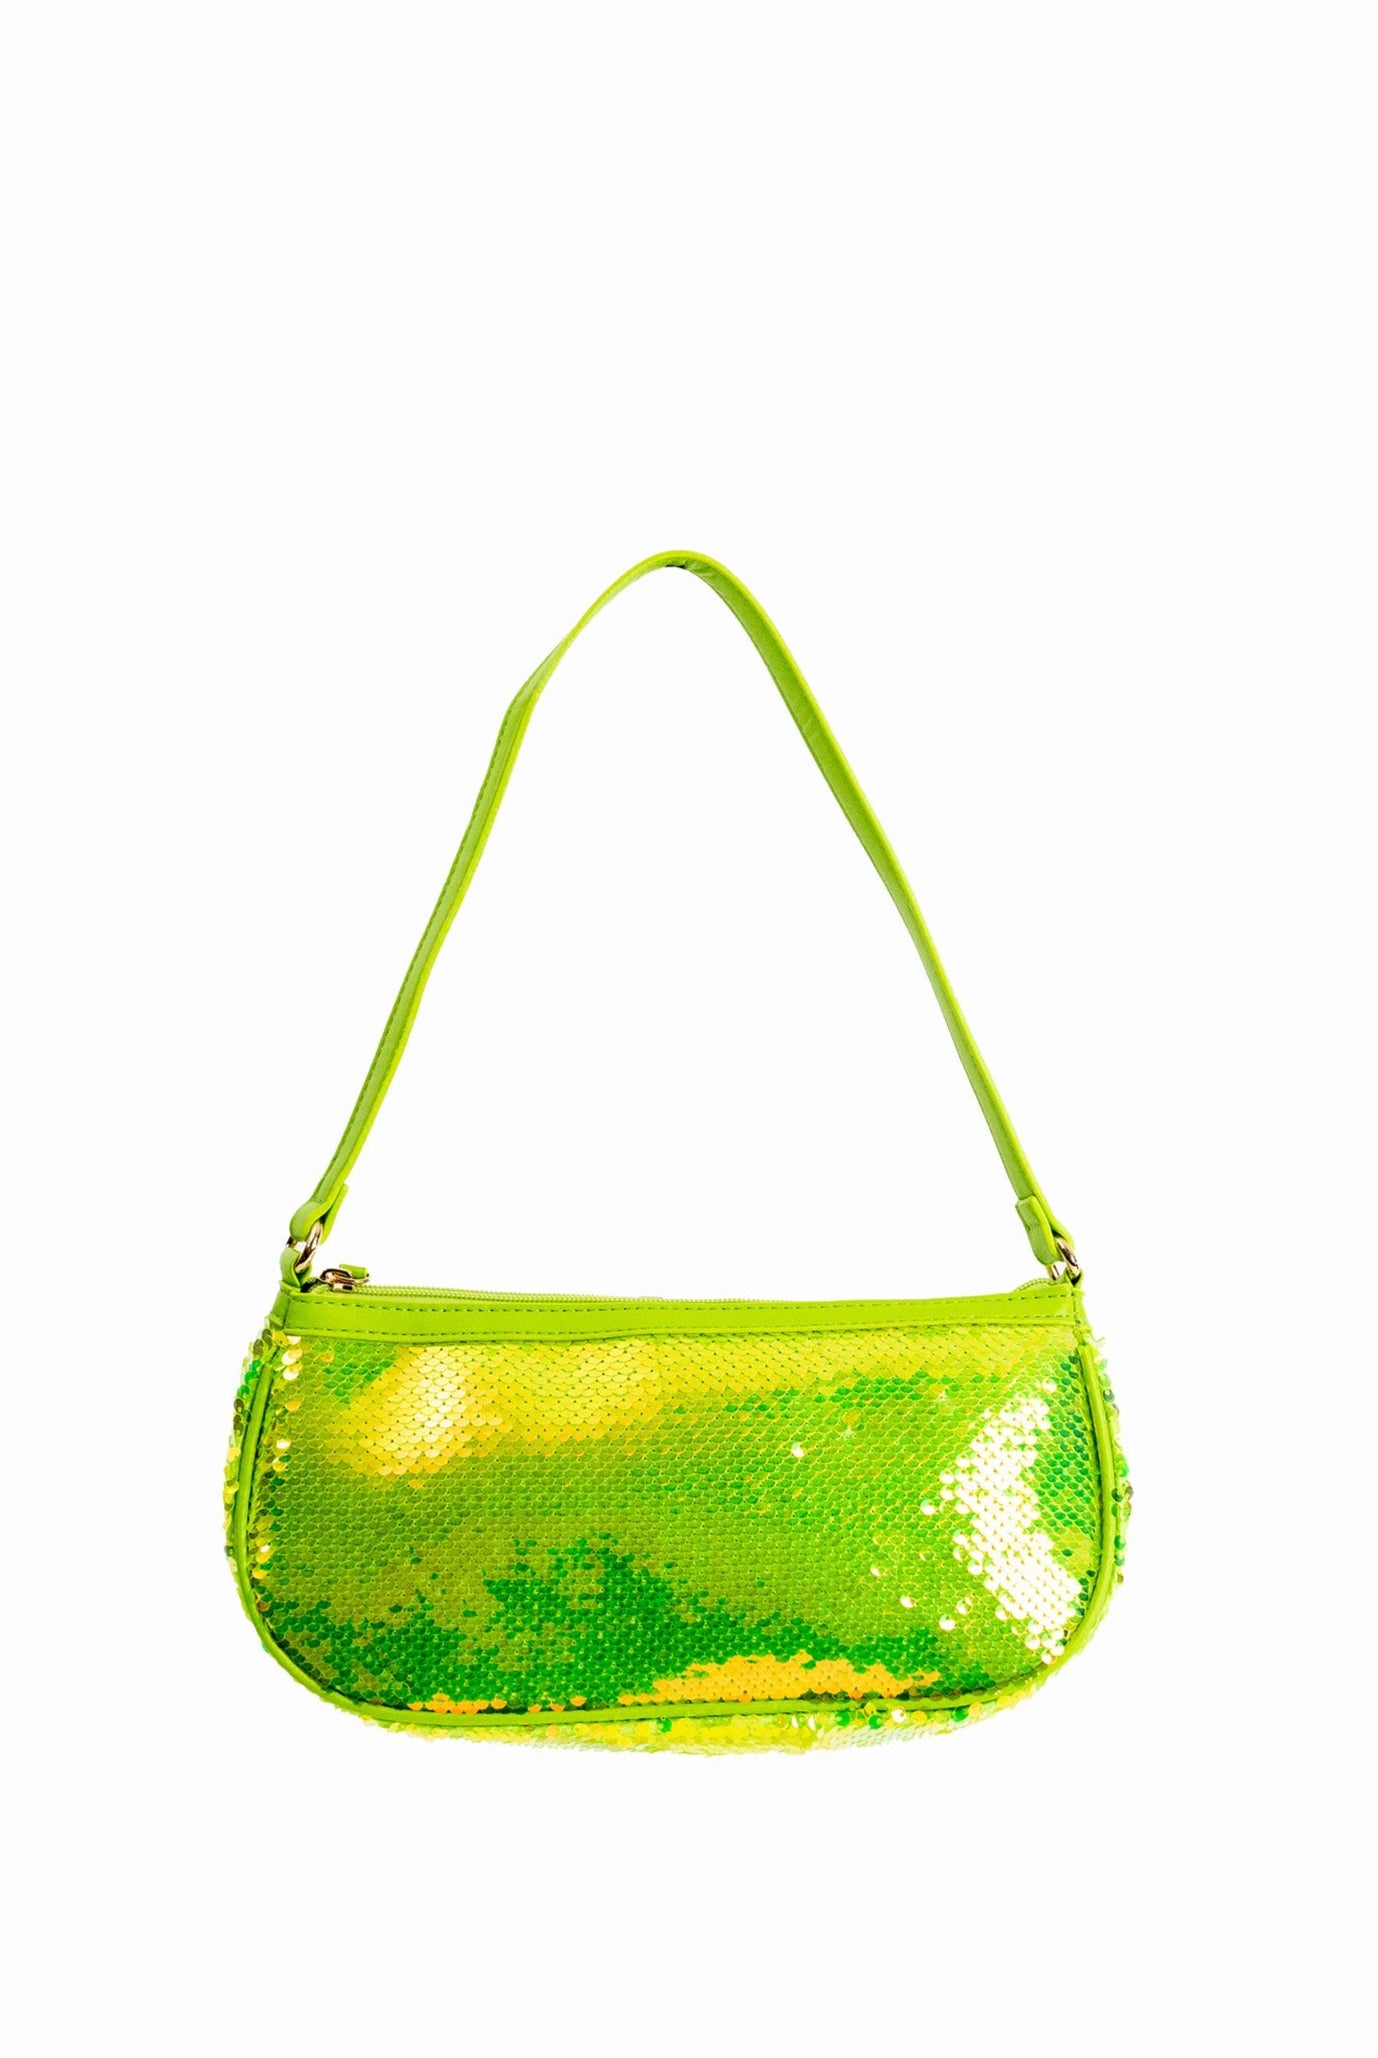 My Accessories London Sequin  shoulder Bag in green | Sparkly Bag | Bright Green Bag | Women's Accessories | Sequin shoulder Bag | Going Out Occasion